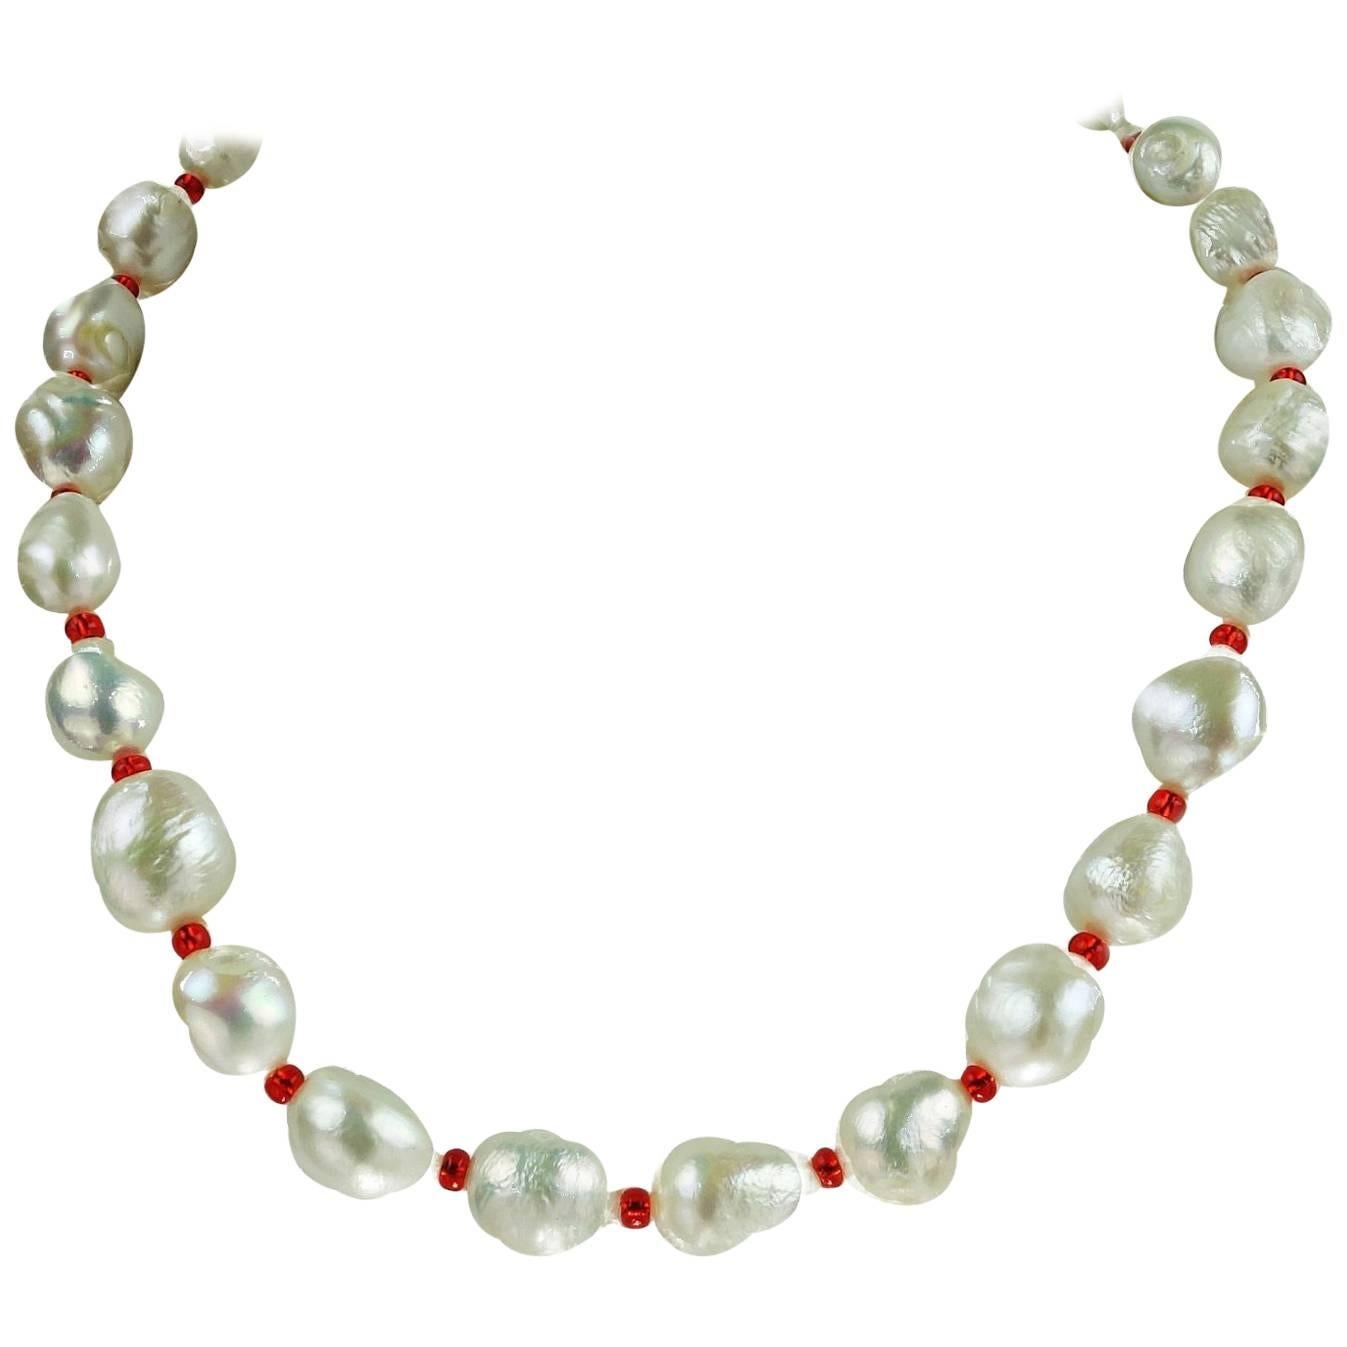  White Freshwater Pearl Necklace with Red accents